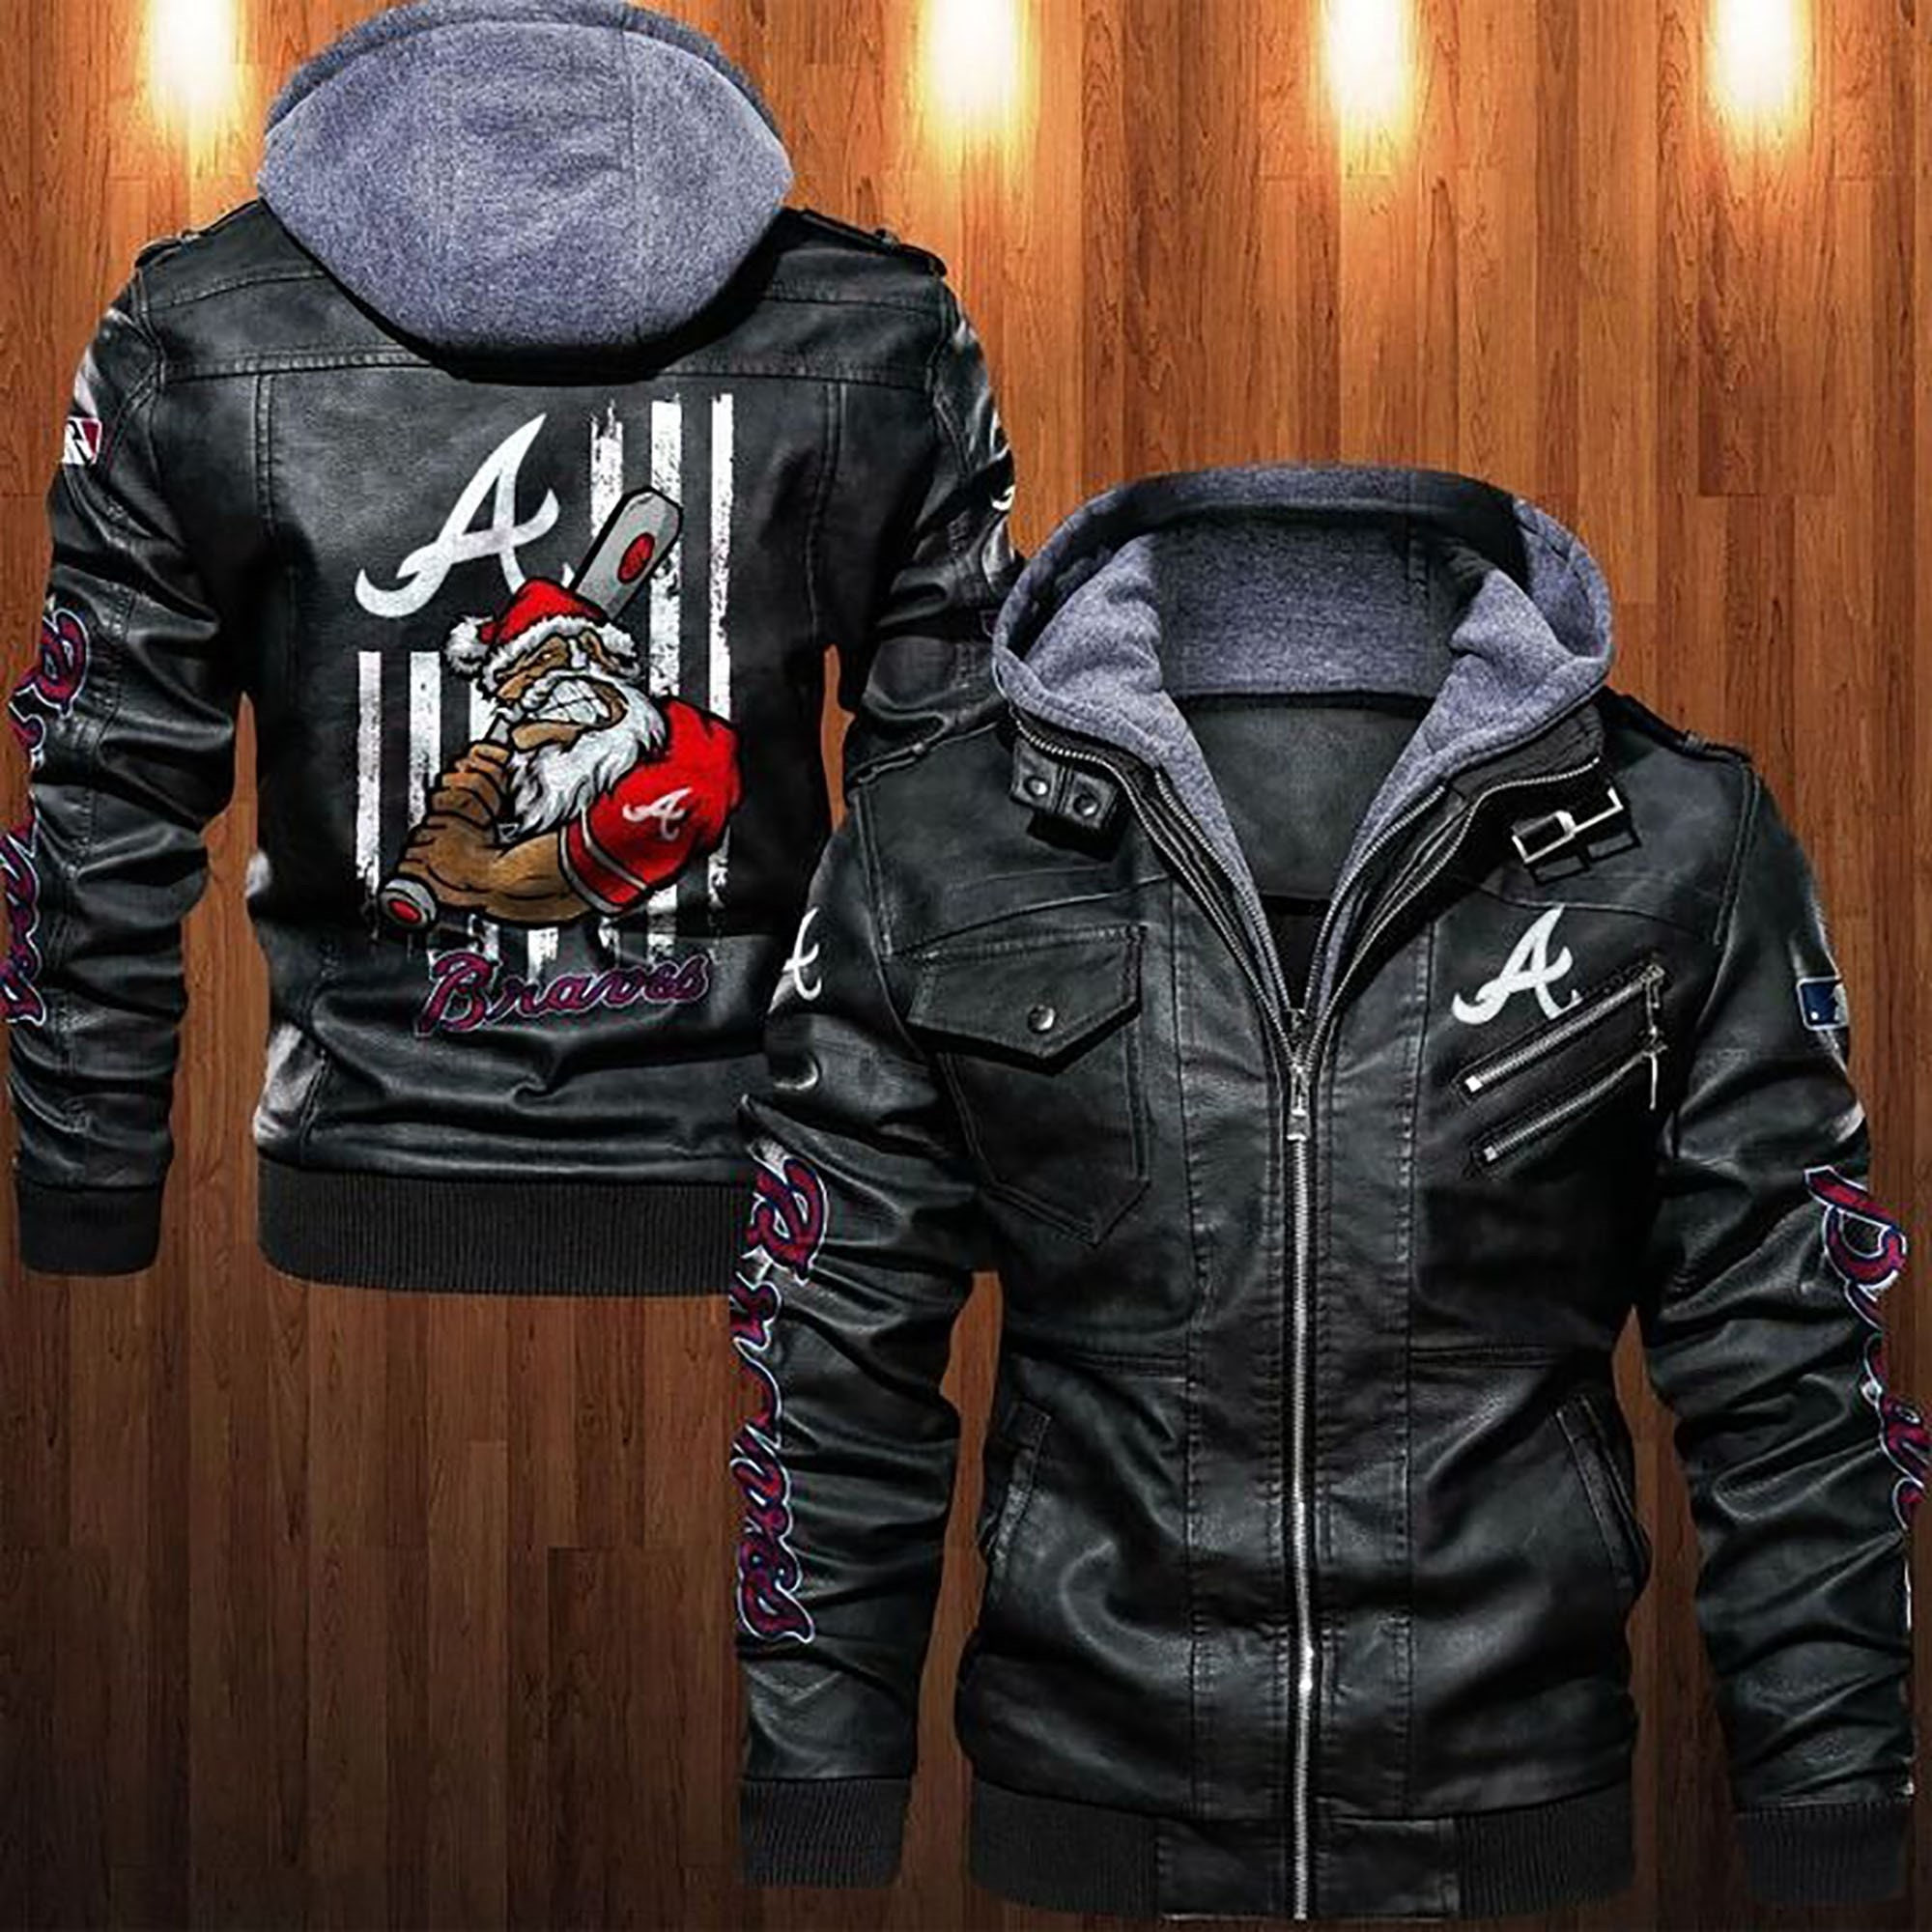 These Amazing Leather Jacket will add to the appeal of your outfit 6